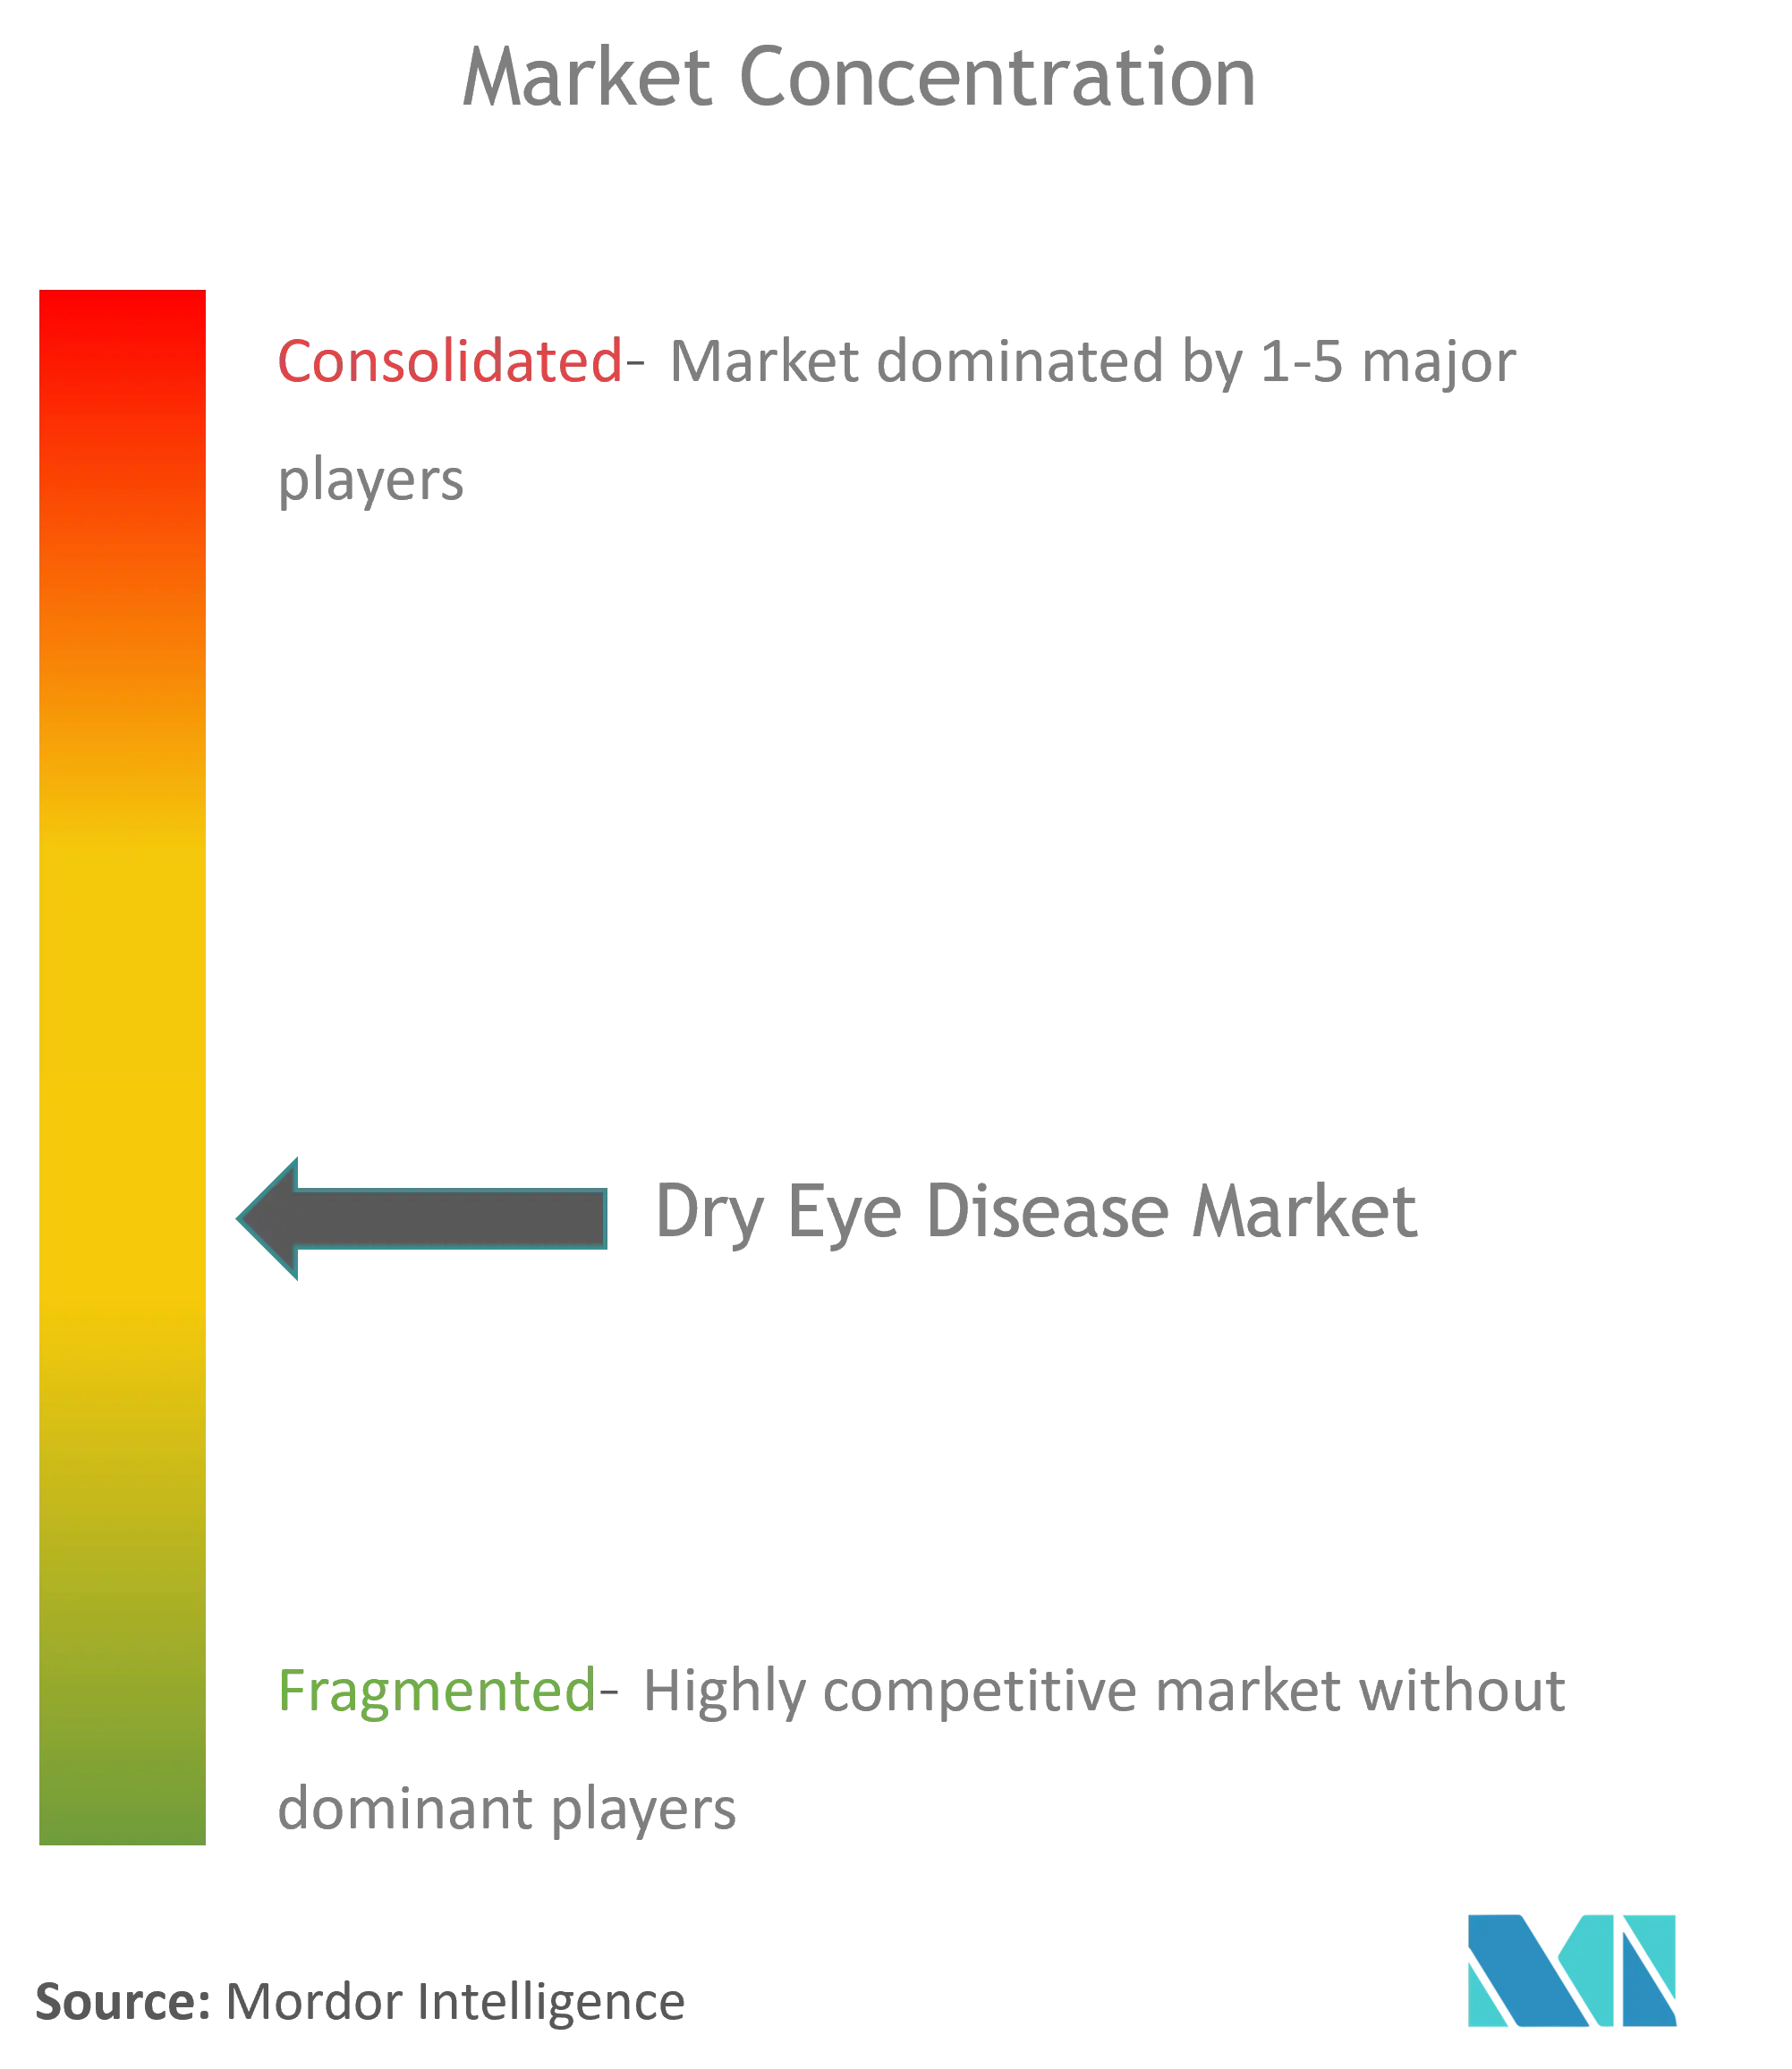 Dry Eye Disease Market Concentration